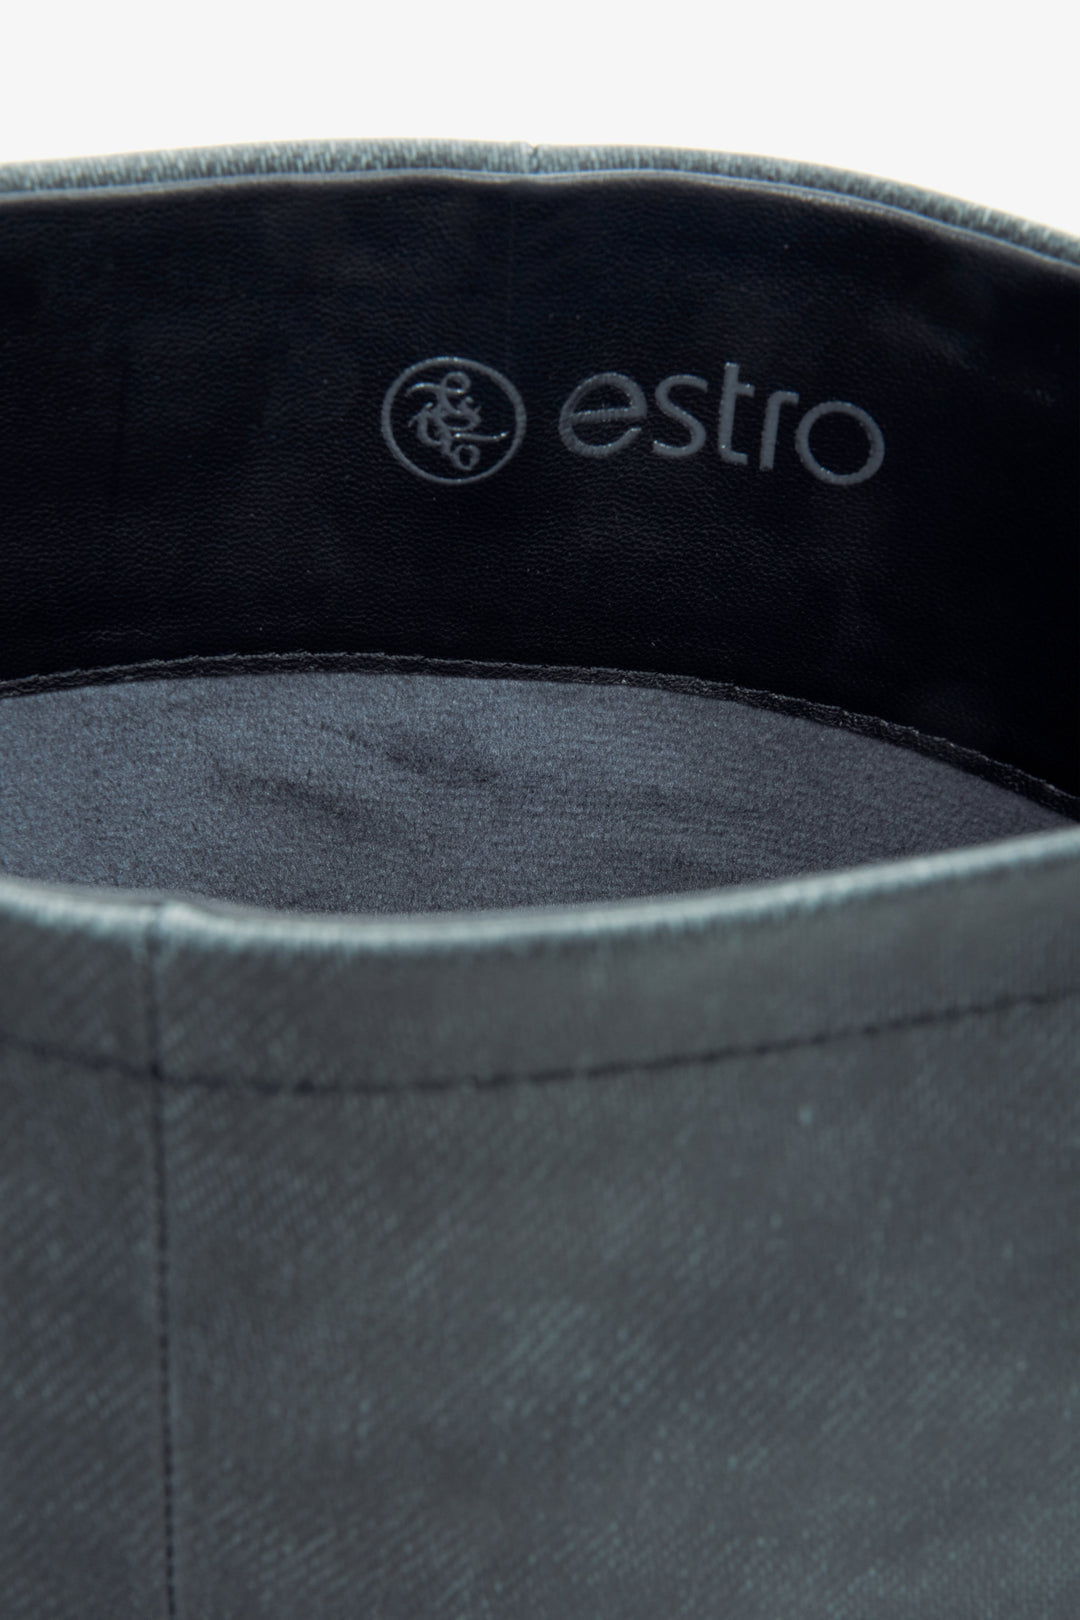 Estro women's boots in grey with a wide shaft - close-up on detail.